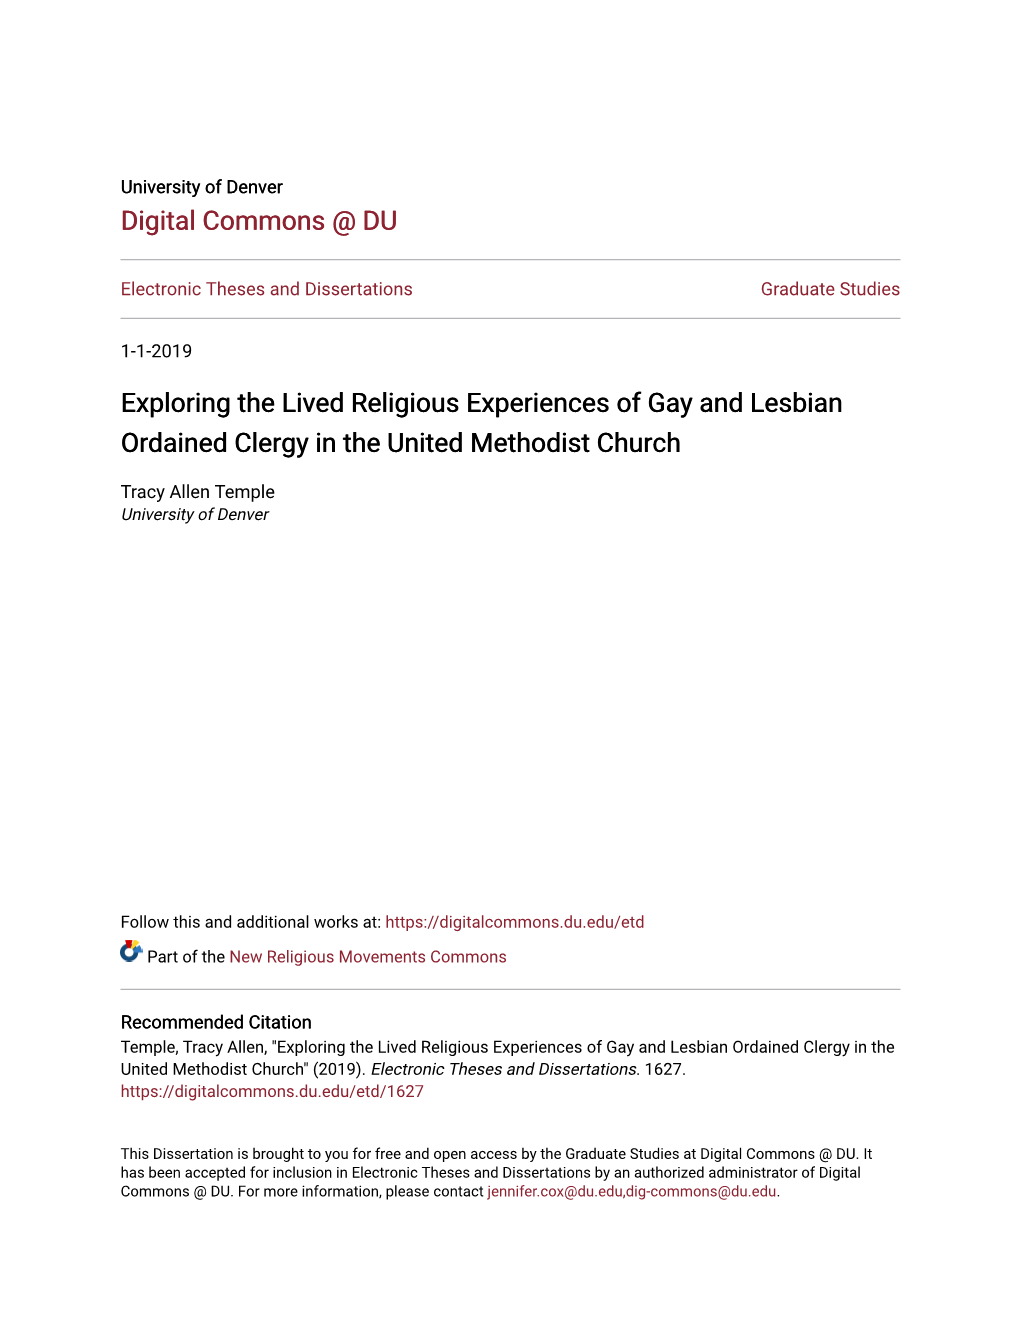 Exploring the Lived Religious Experiences of Gay and Lesbian Ordained Clergy in the United Methodist Church